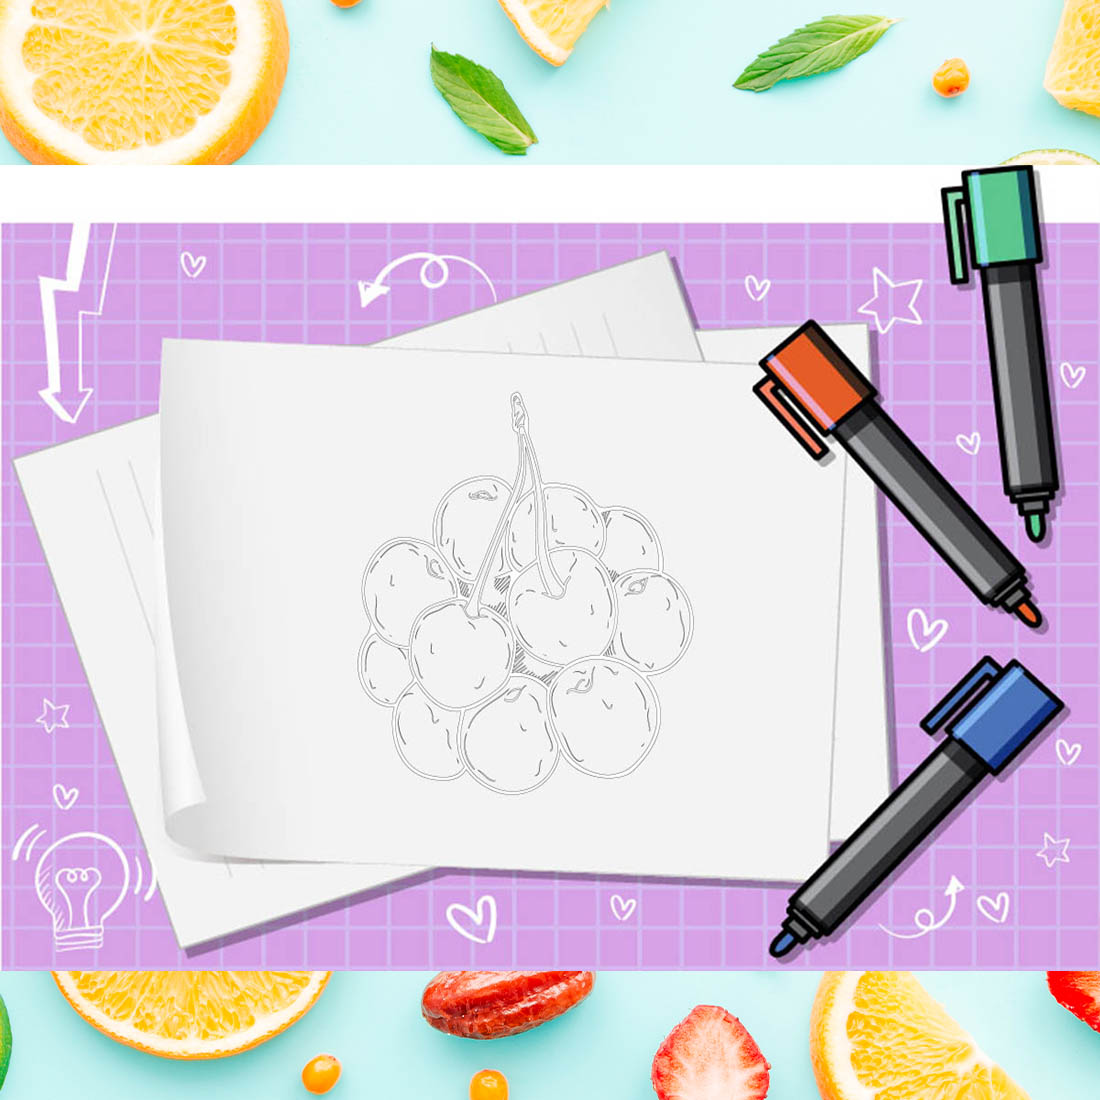 Paper with had drawn some fruit.